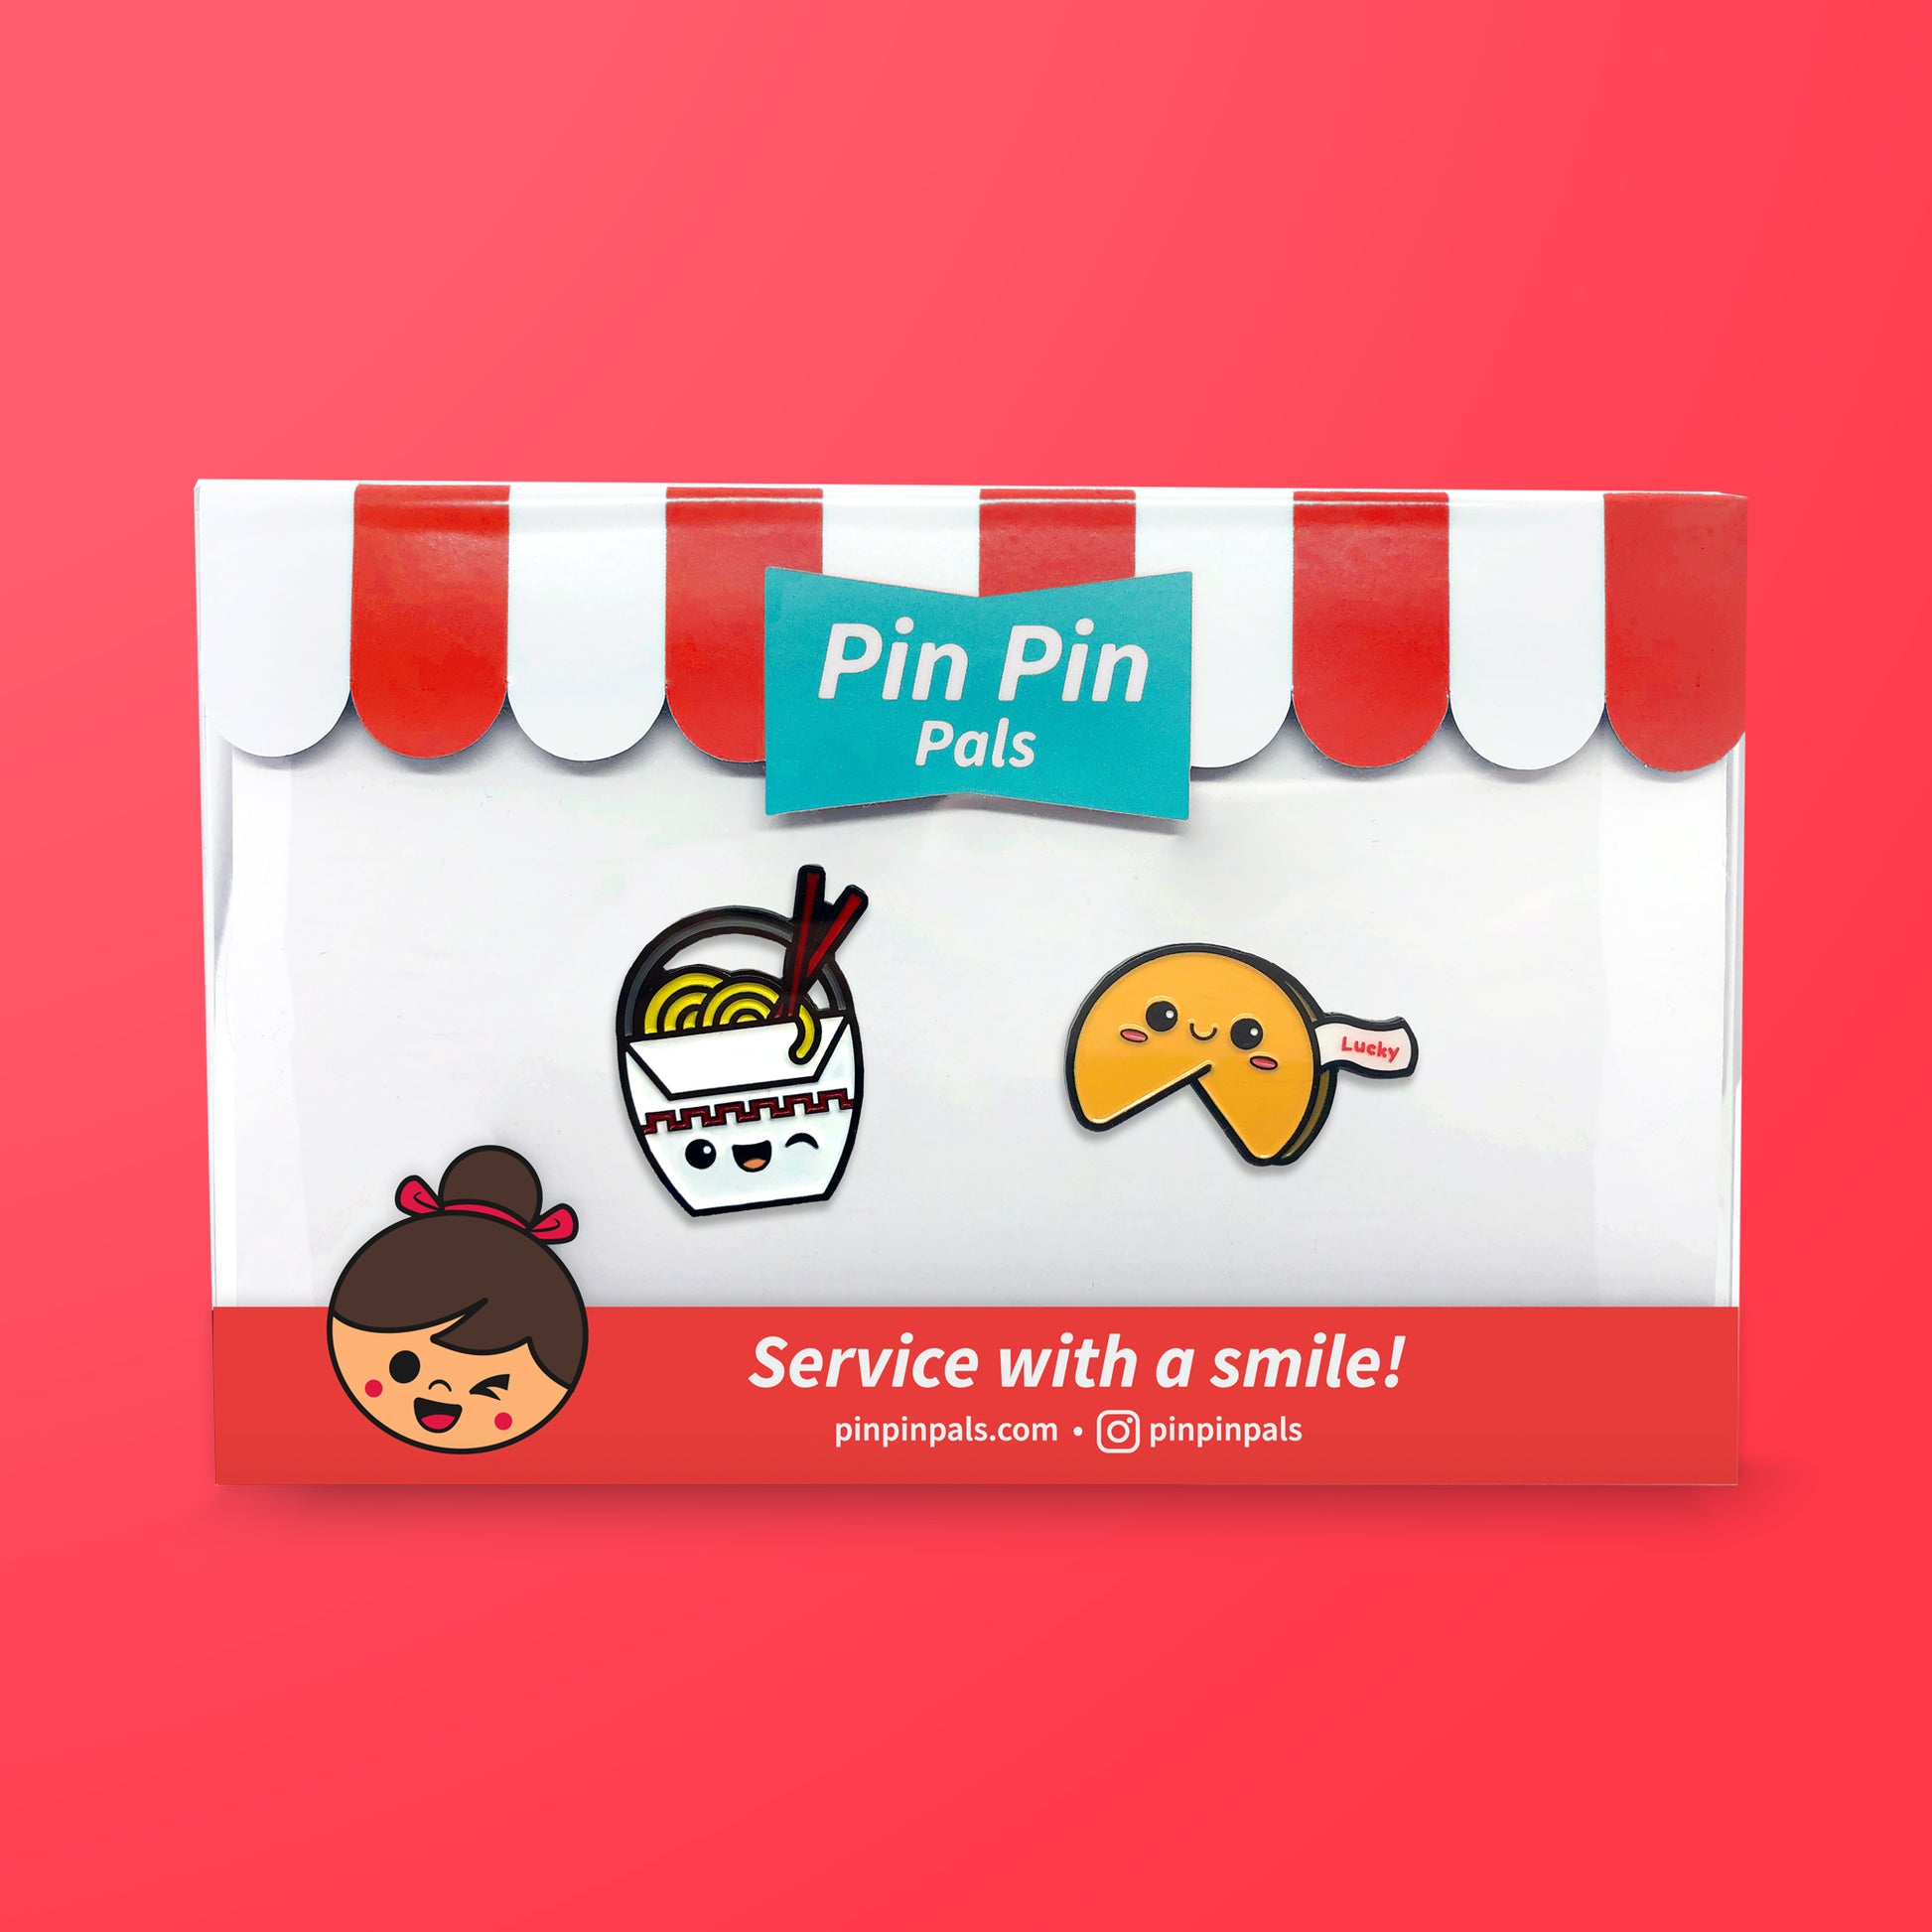 Pin Pin Pals Chinese Takeout and Fortune Cookie enamel pin set in packaging box on red background